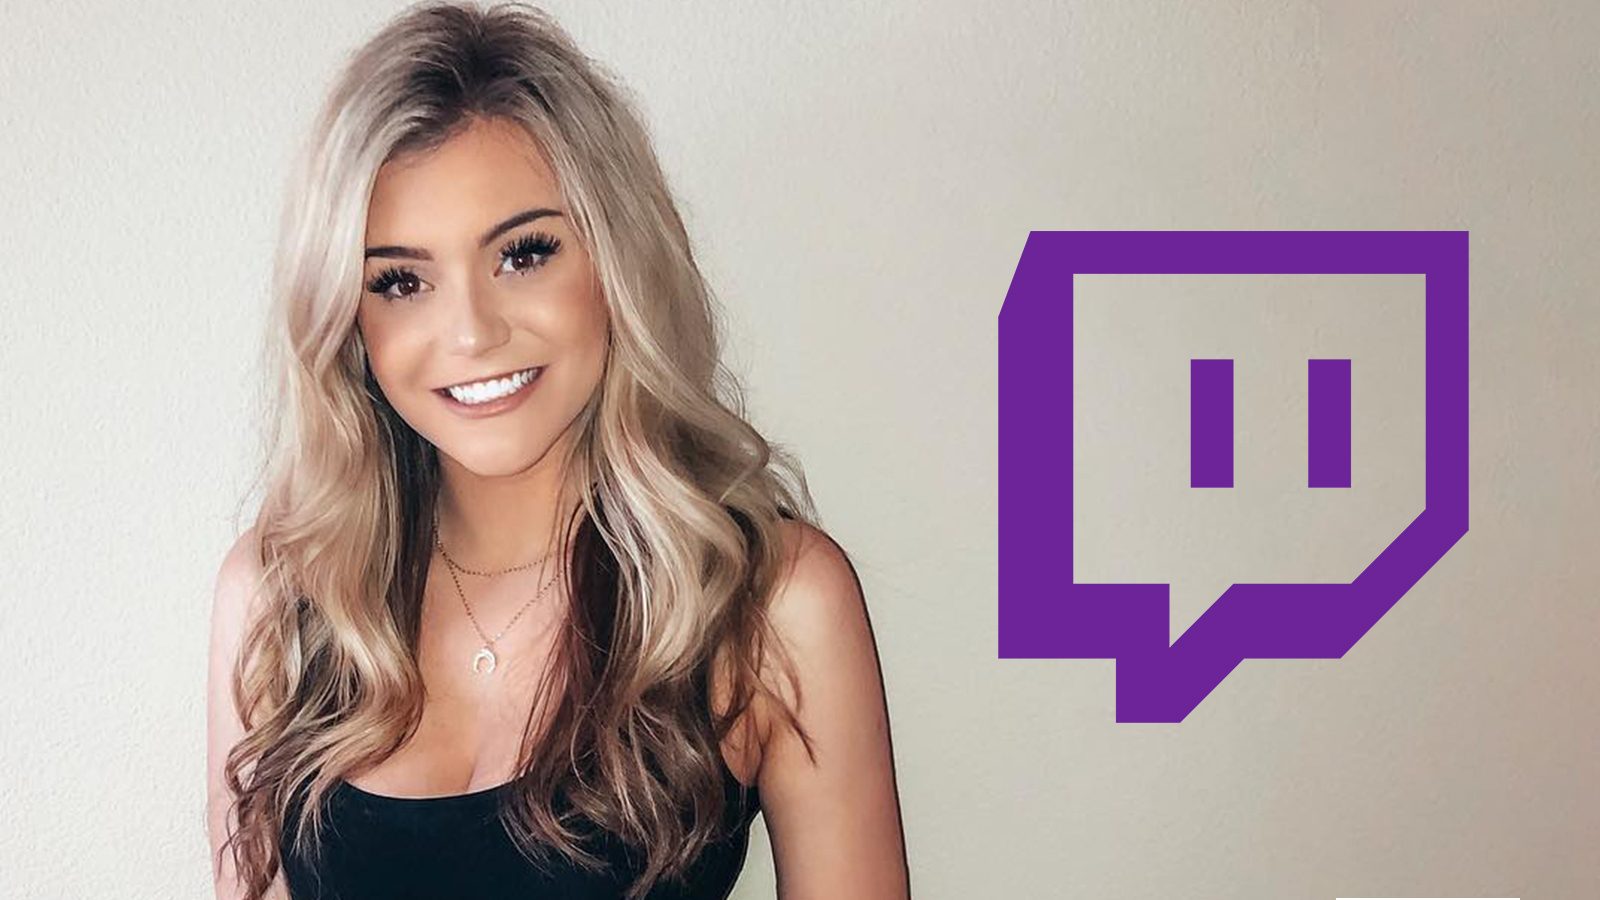 BrookeAB takes break from Twitch after receiving threats to herself and fam...